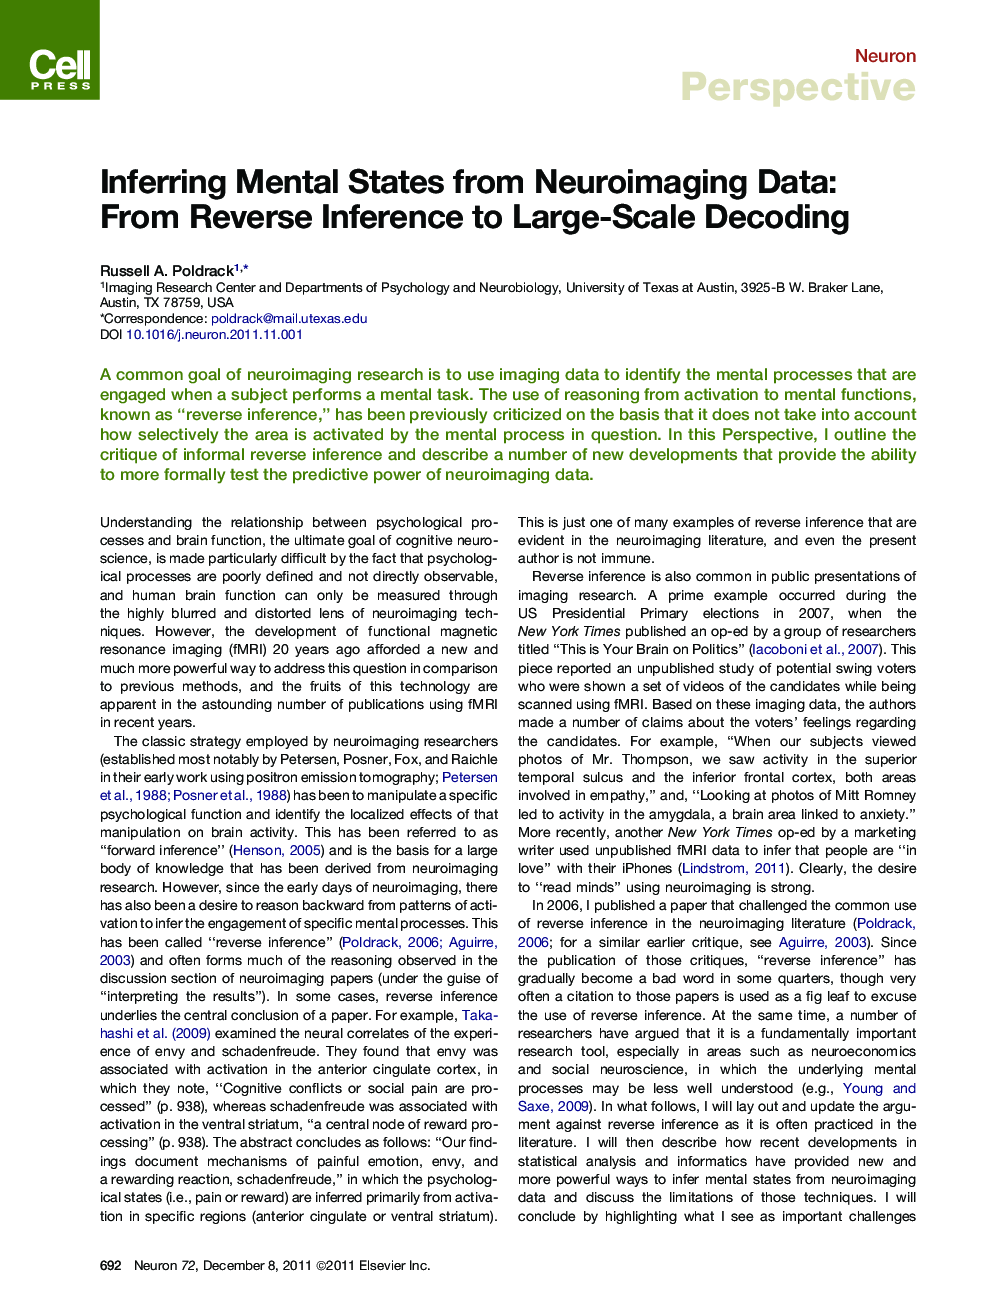 Inferring Mental States from Neuroimaging Data: From Reverse Inference to Large-Scale Decoding